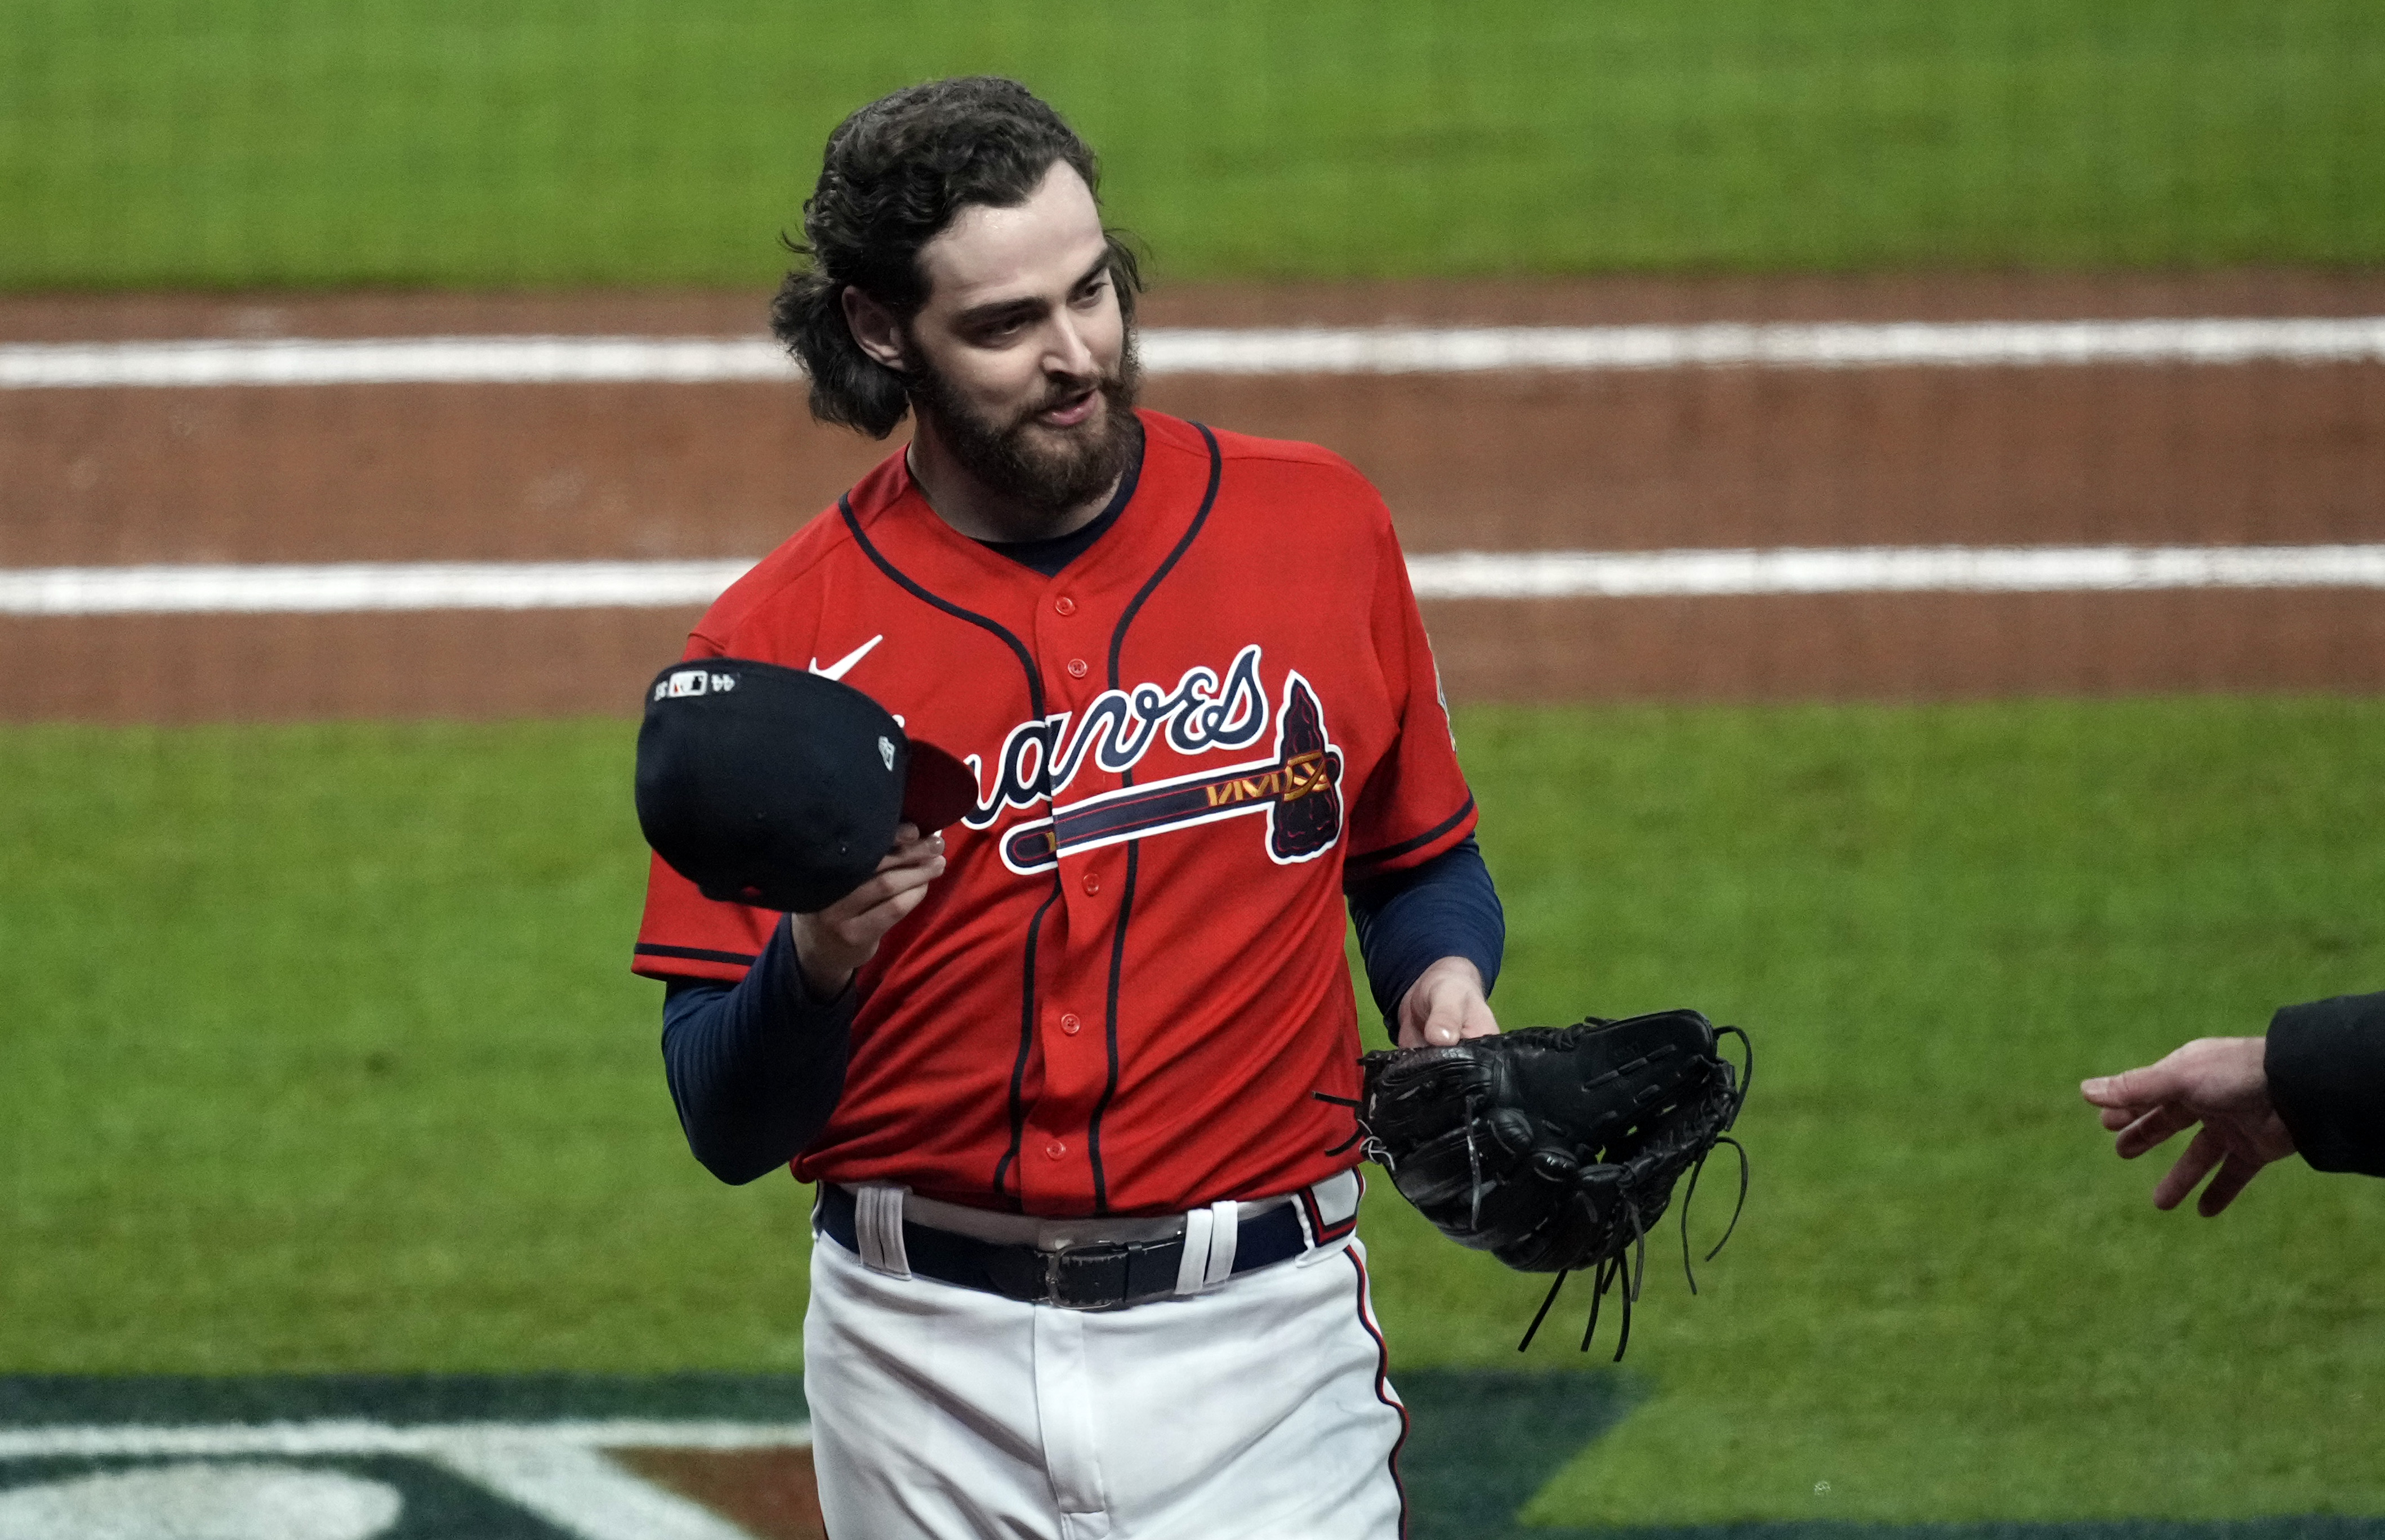 Gut' call to pull Anderson paid off for Braves in World Series Game 3